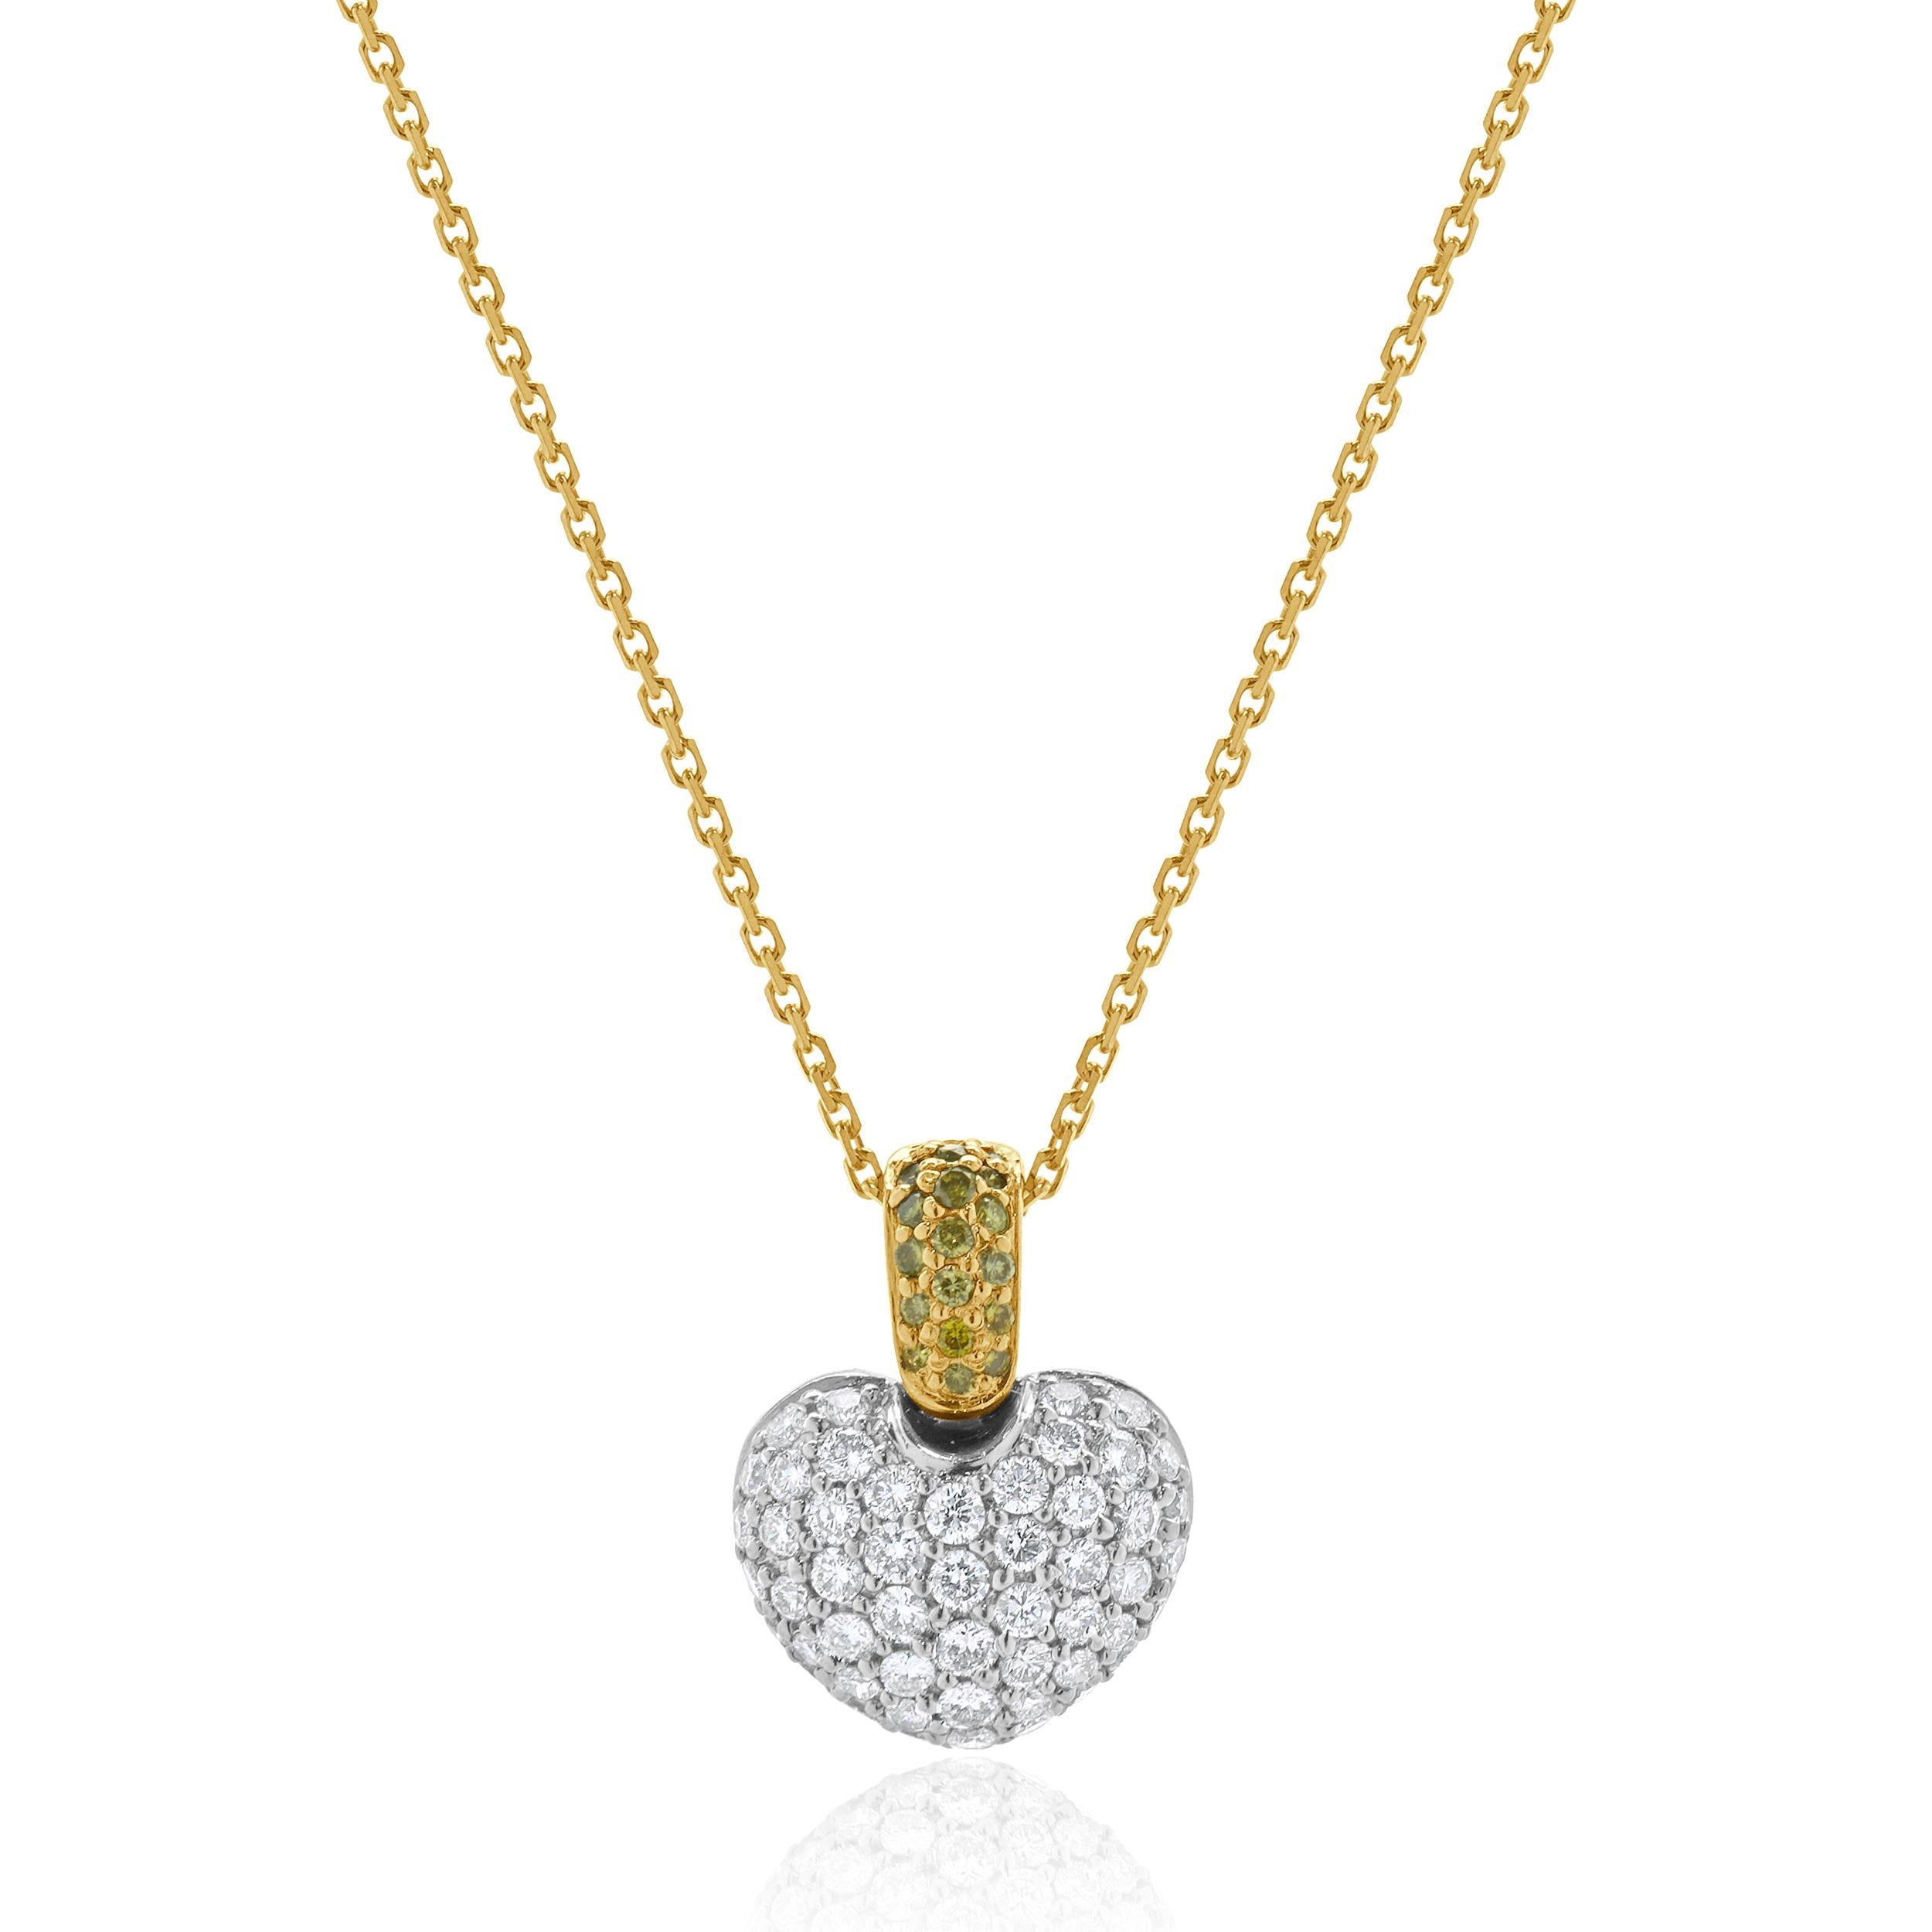 Designer: custom
Material: 18K white & yellow gold
Diamonds: round brilliant cut = 1.00cttw
Color: G / Fancy Yellow
Clarity: SI1
Dimensions: necklace measures 18-inches in length 
Weight: 5.76 grams
